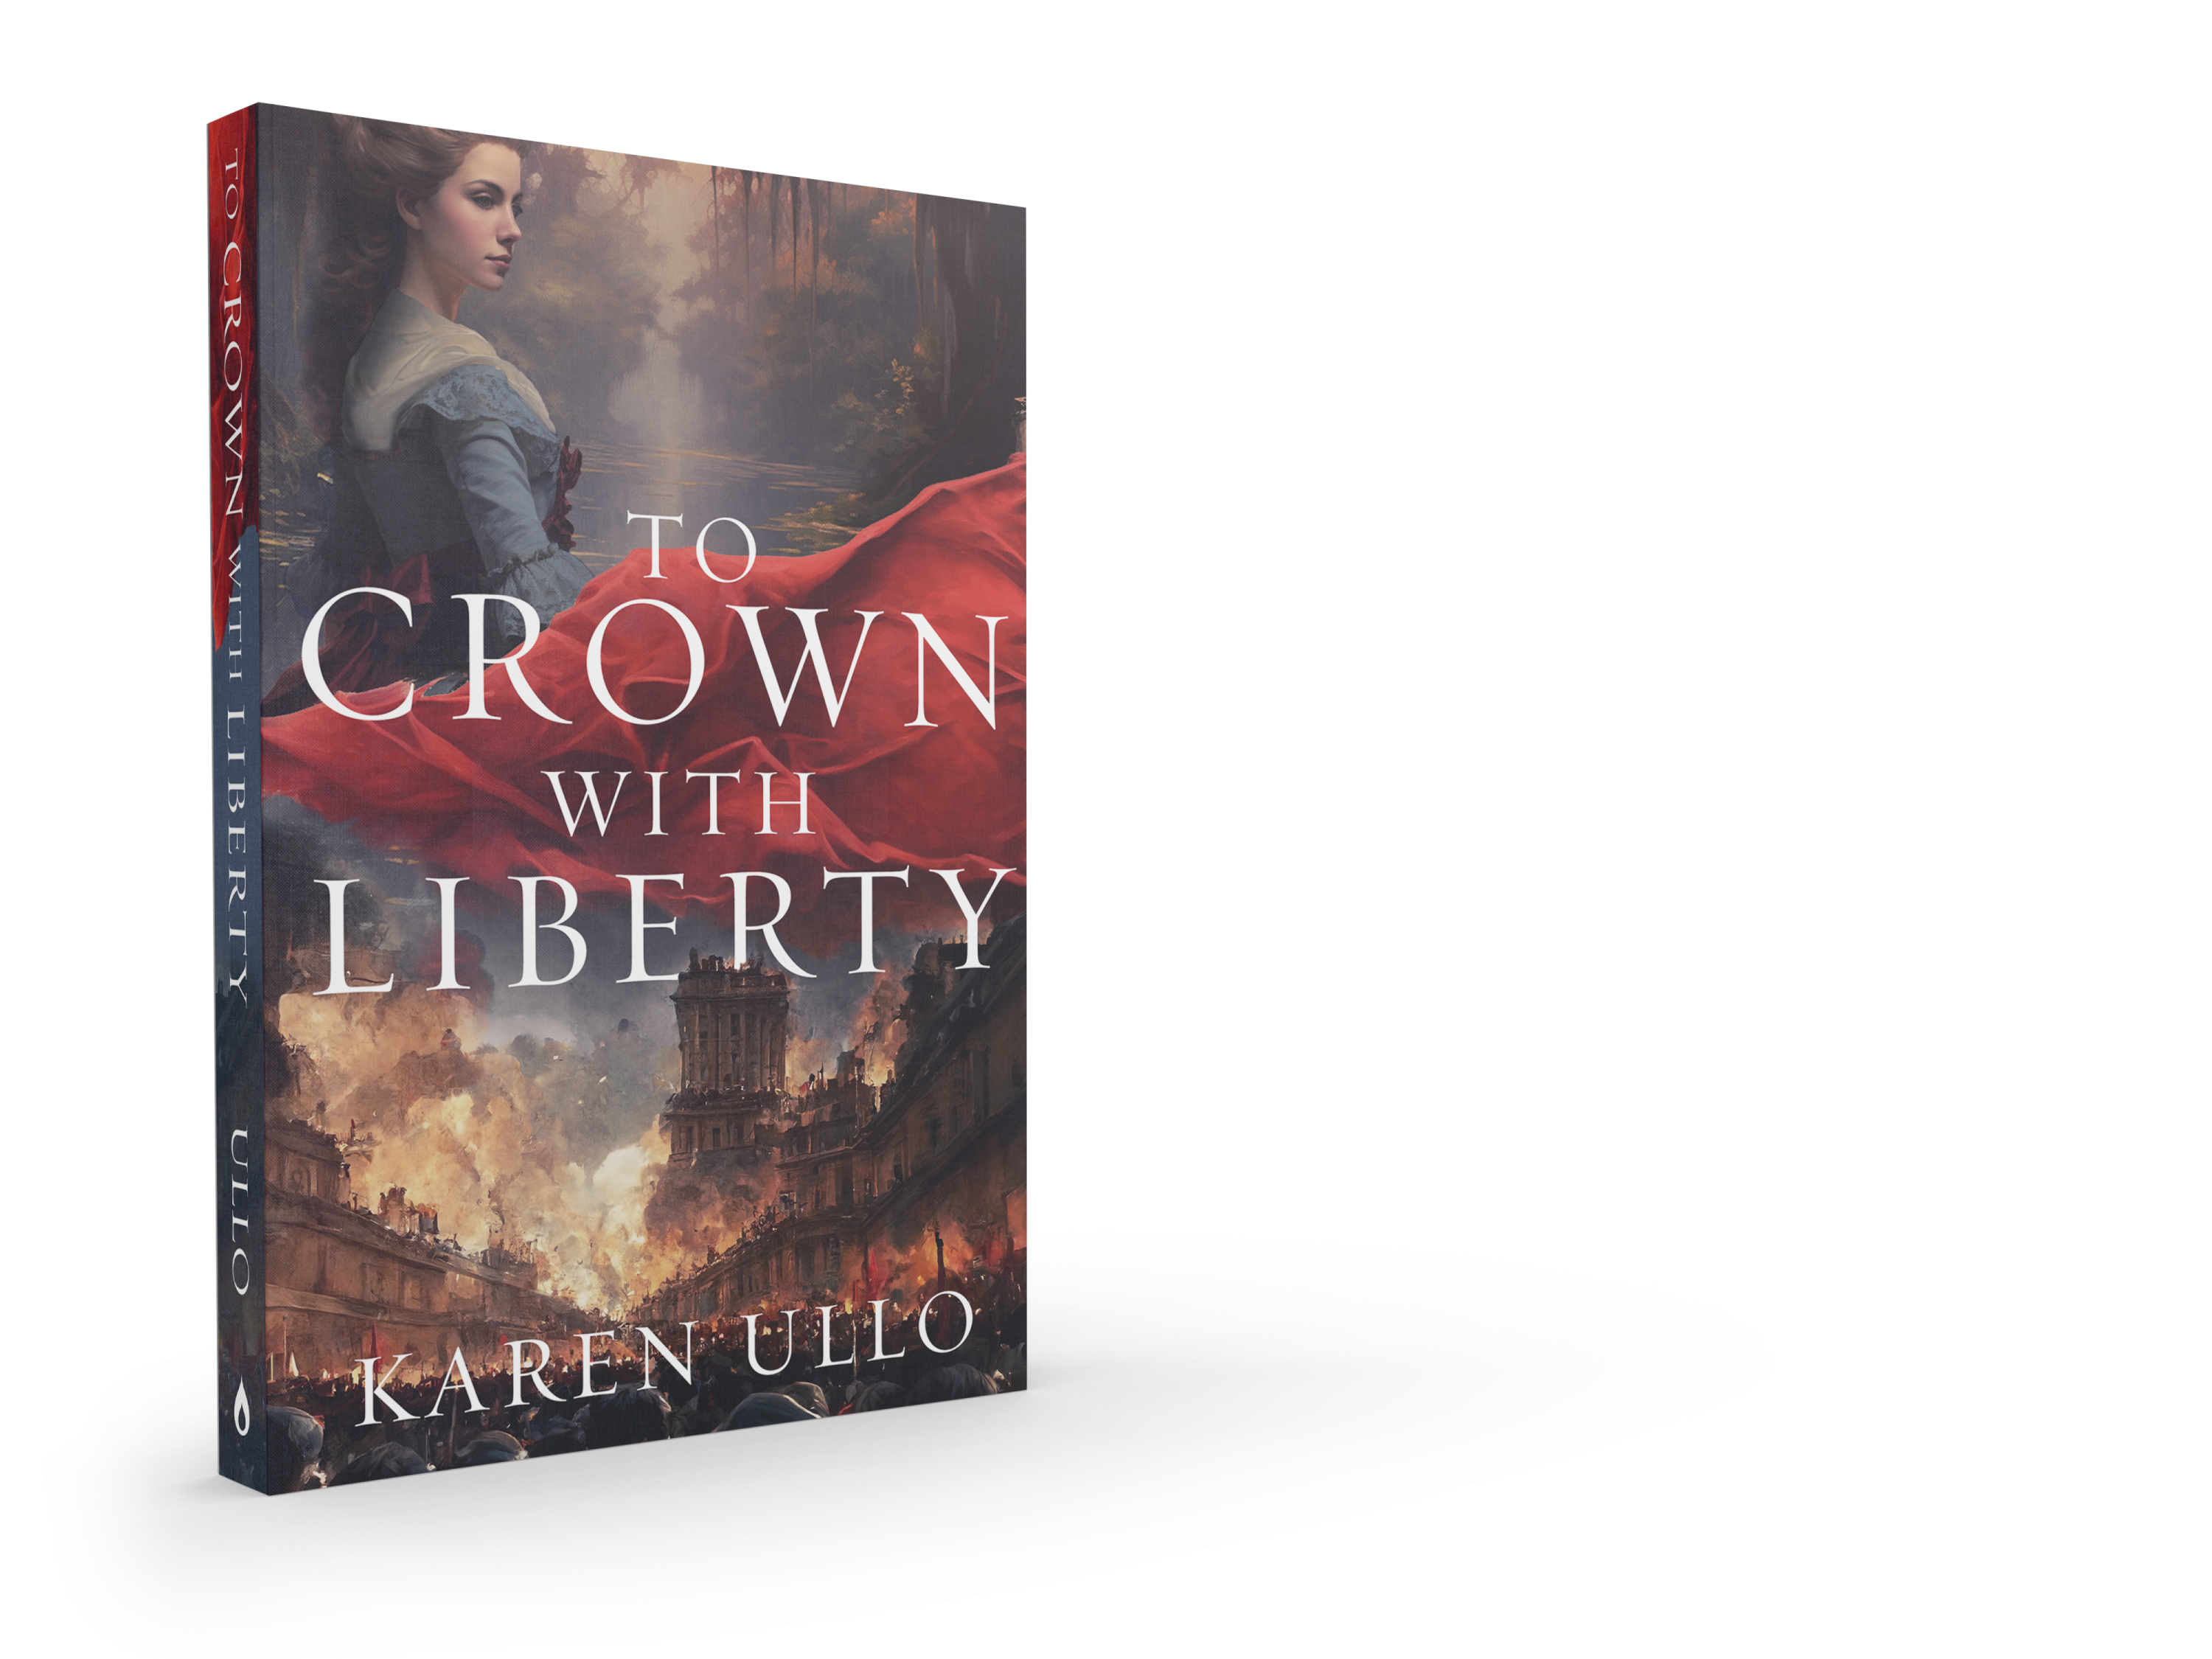 To Crown with Liberty by Karen Ullo- Review